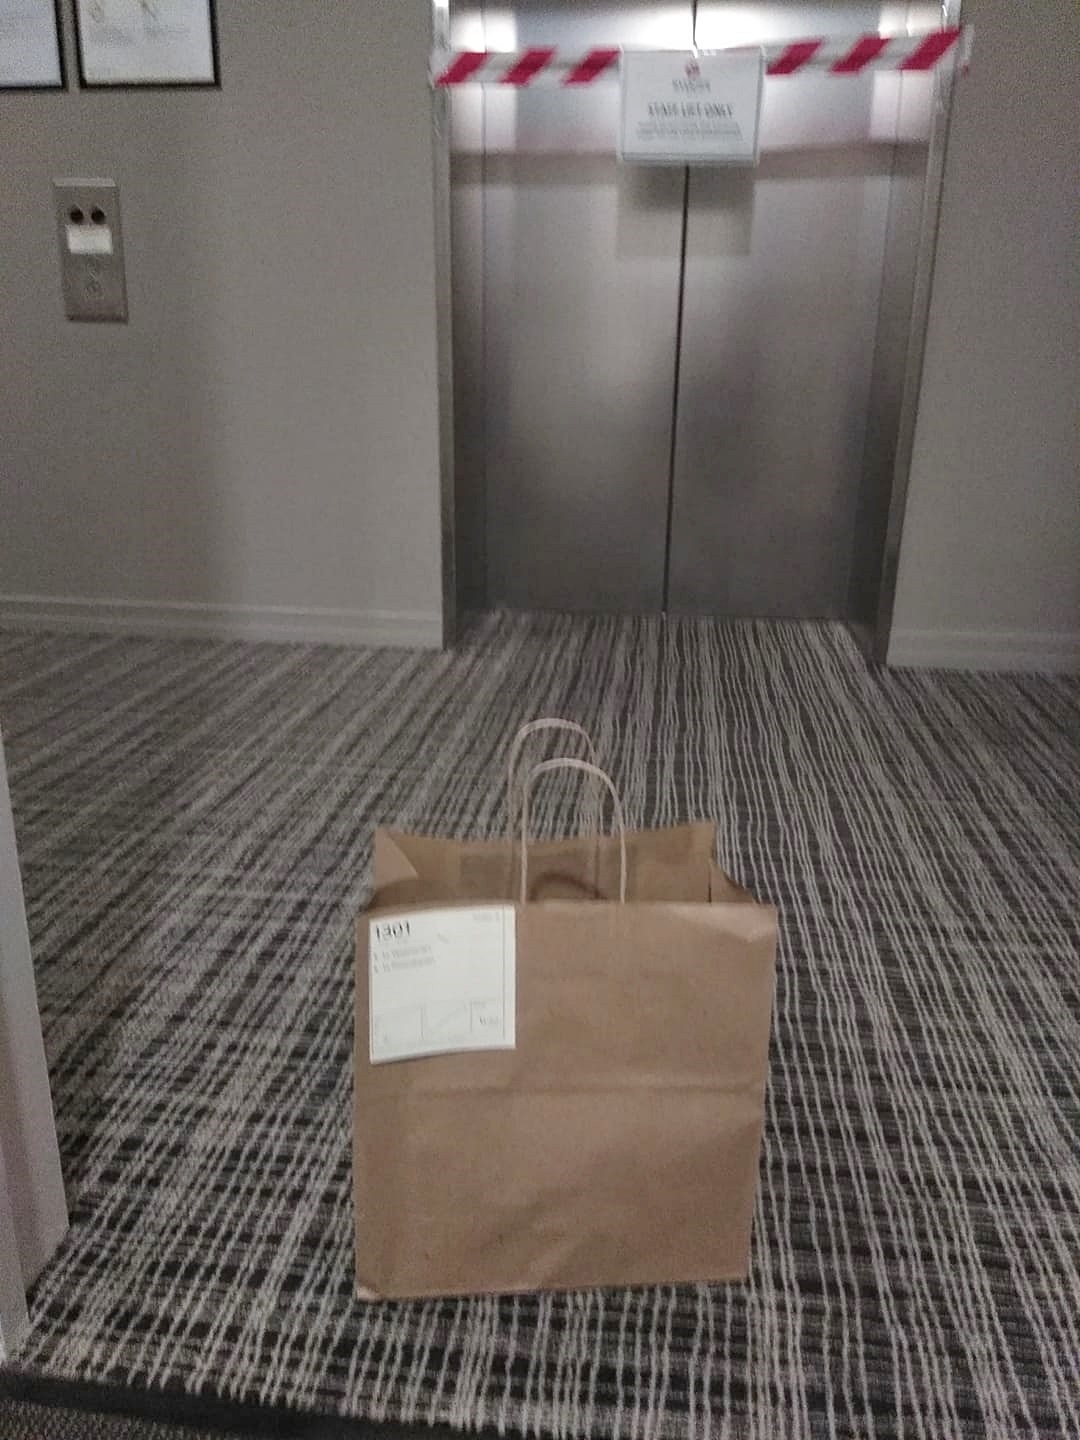 paper bag by a lift